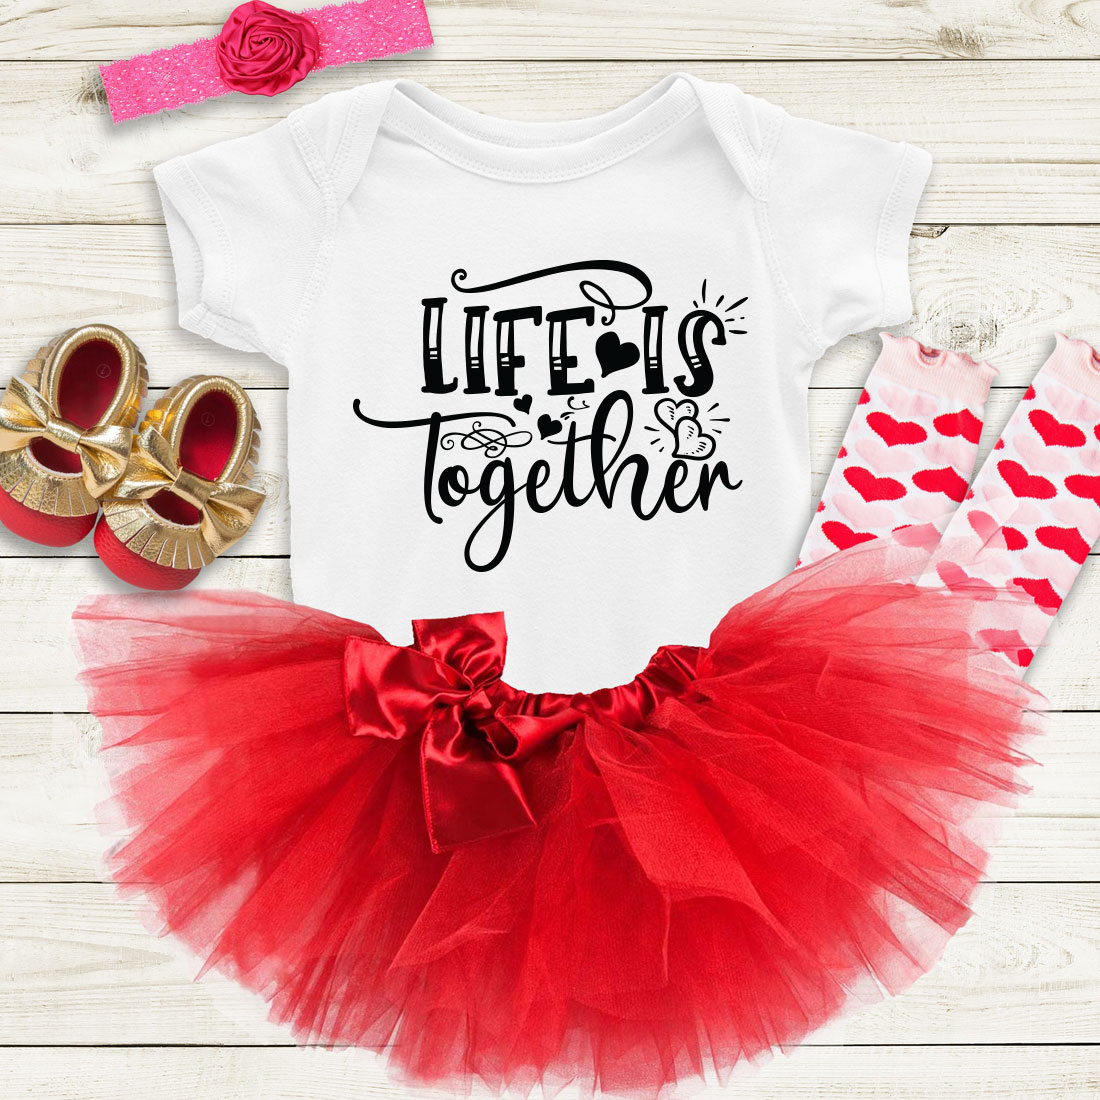 Baby girl's outfit with a red tutu and matching shoes.